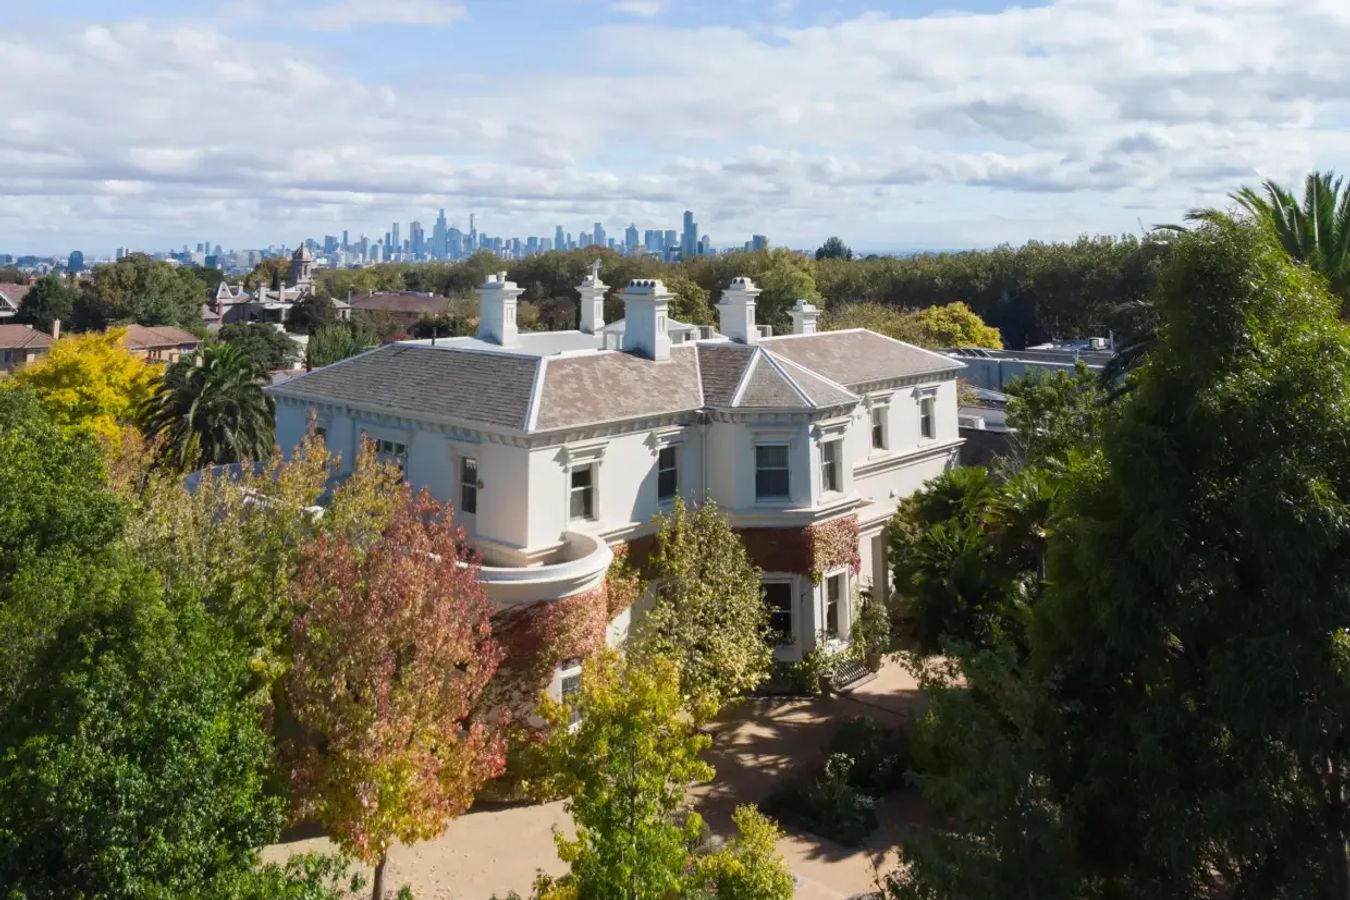 Rupert Murdoch's nephew sells Melbourne mansion for more than $24m - AFR